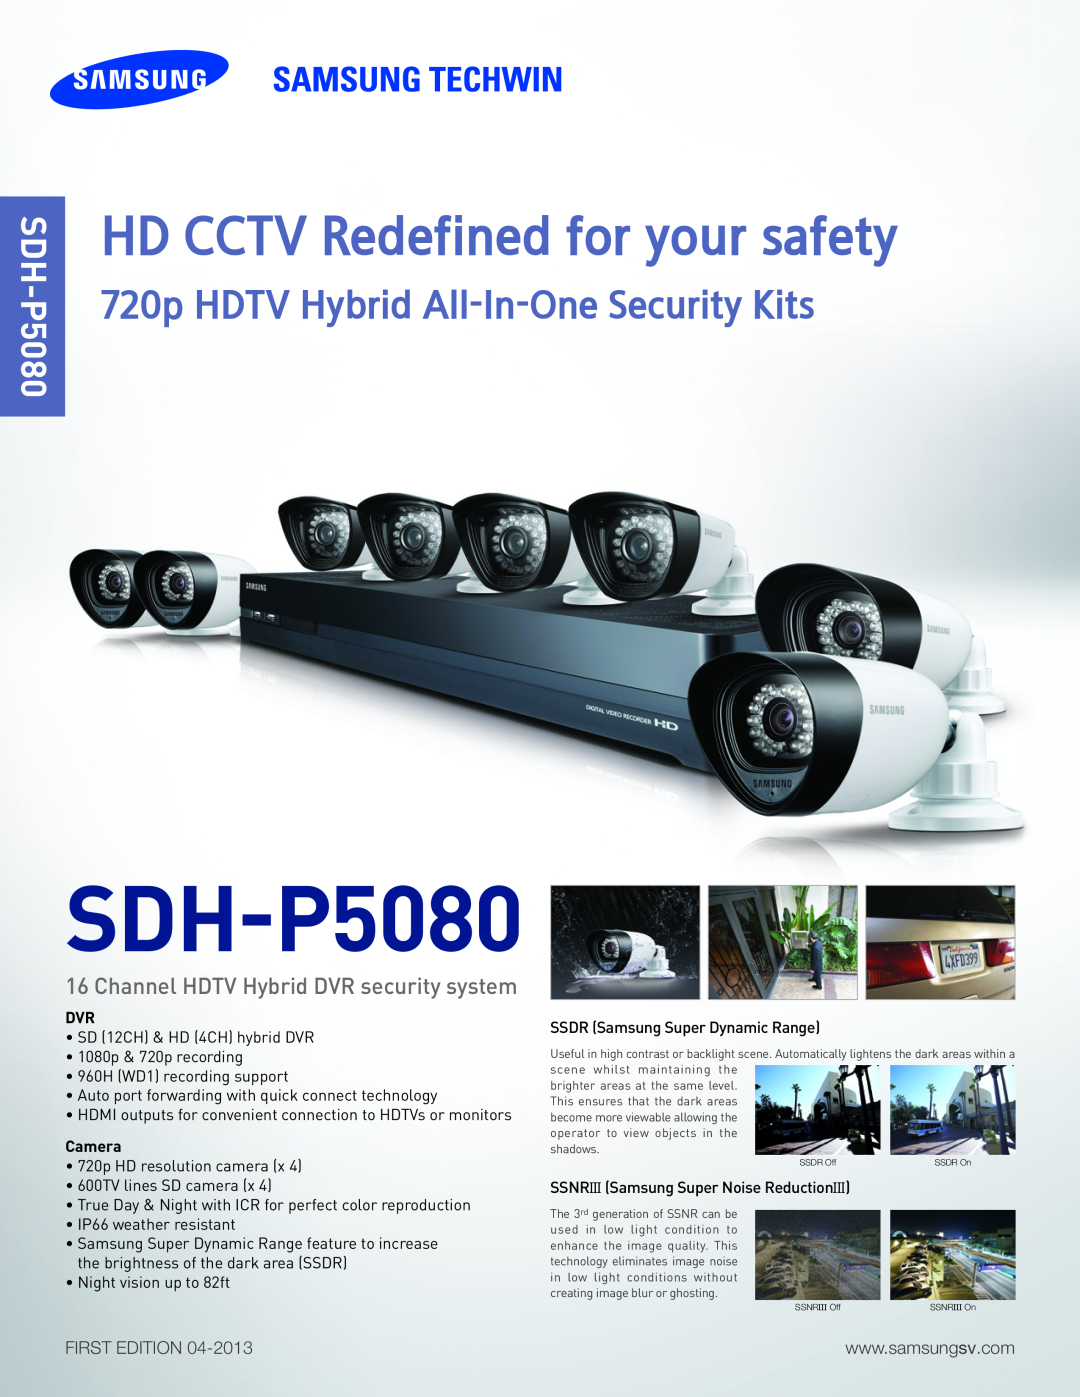 Samsung SDHP5080 manual SDH-P5080, HD CCTV Redefined for your safety, 720p HDTV Hybrid All-In-OneSecurity Kits, Camera 